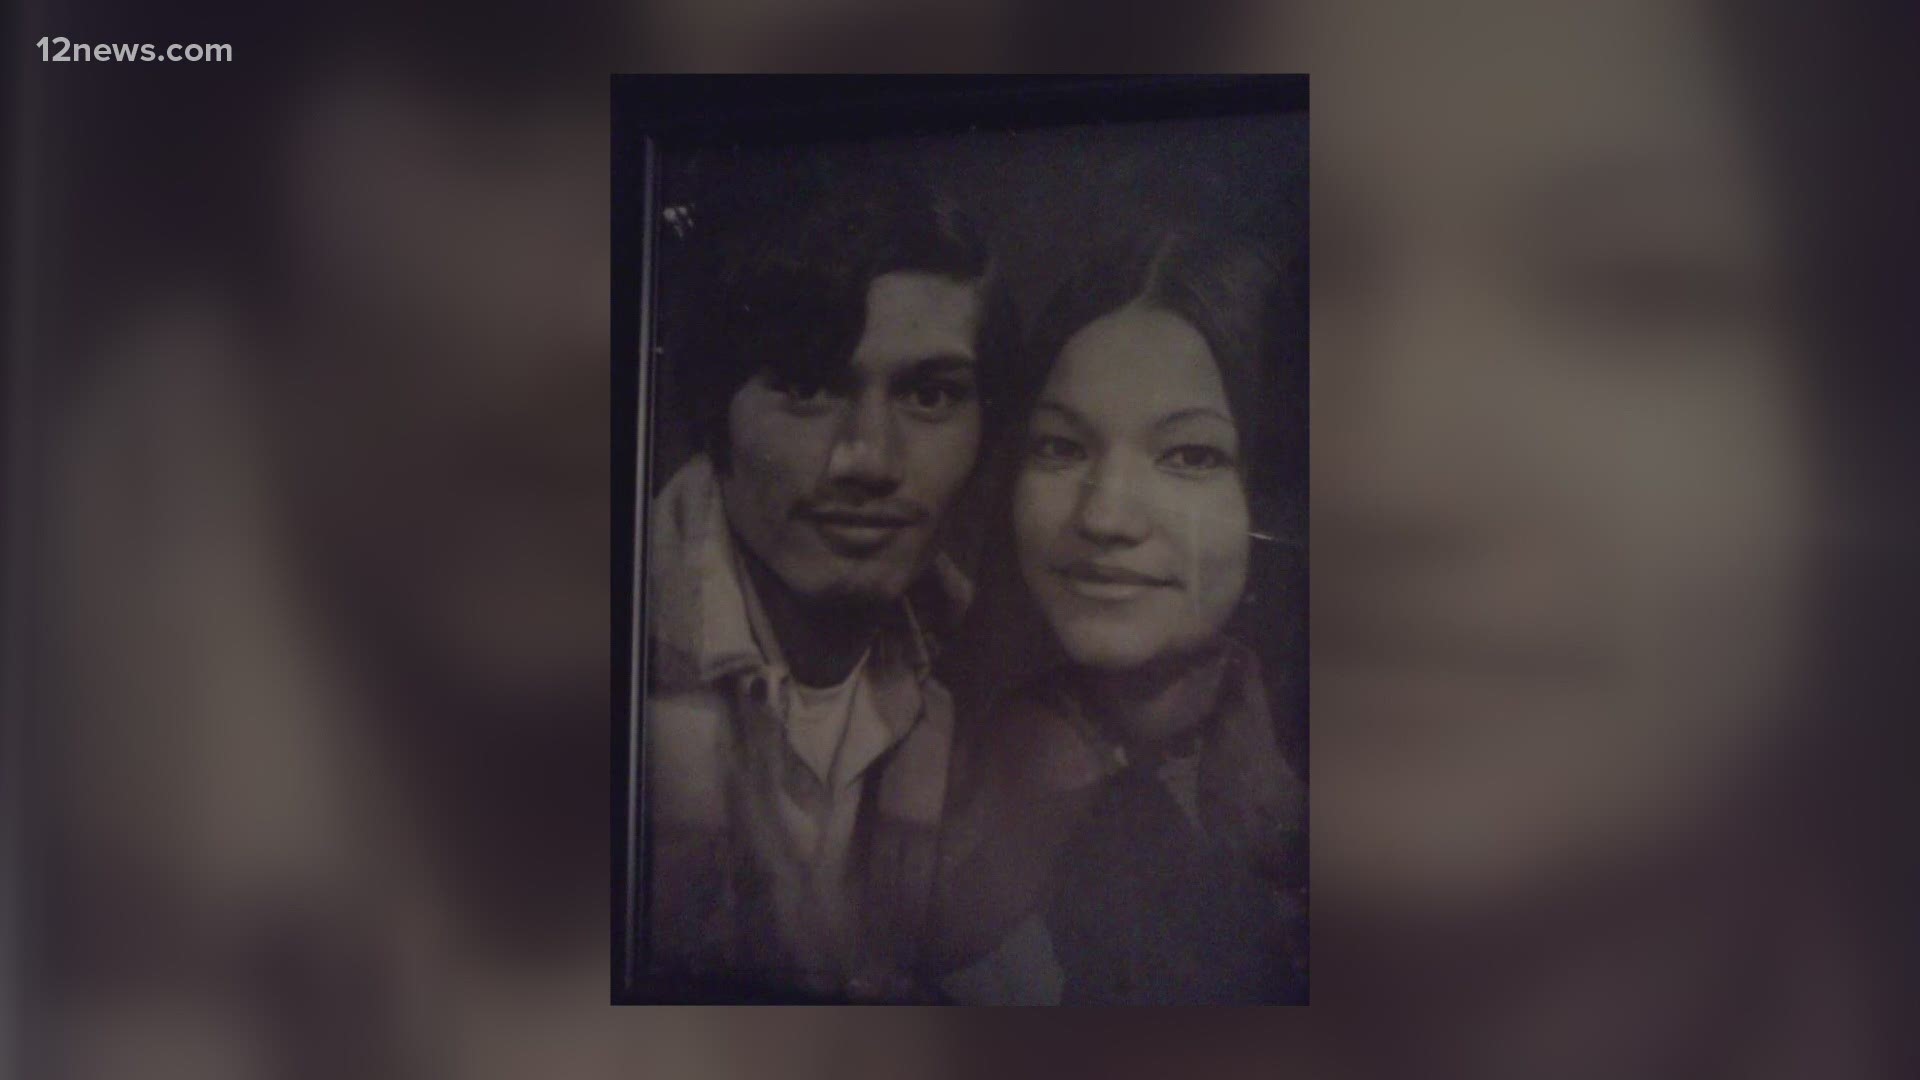 In 1971, Manuel and Sally Montano were just a couple of kids in love. 50 years later, they died only seconds apart from COVID-19.